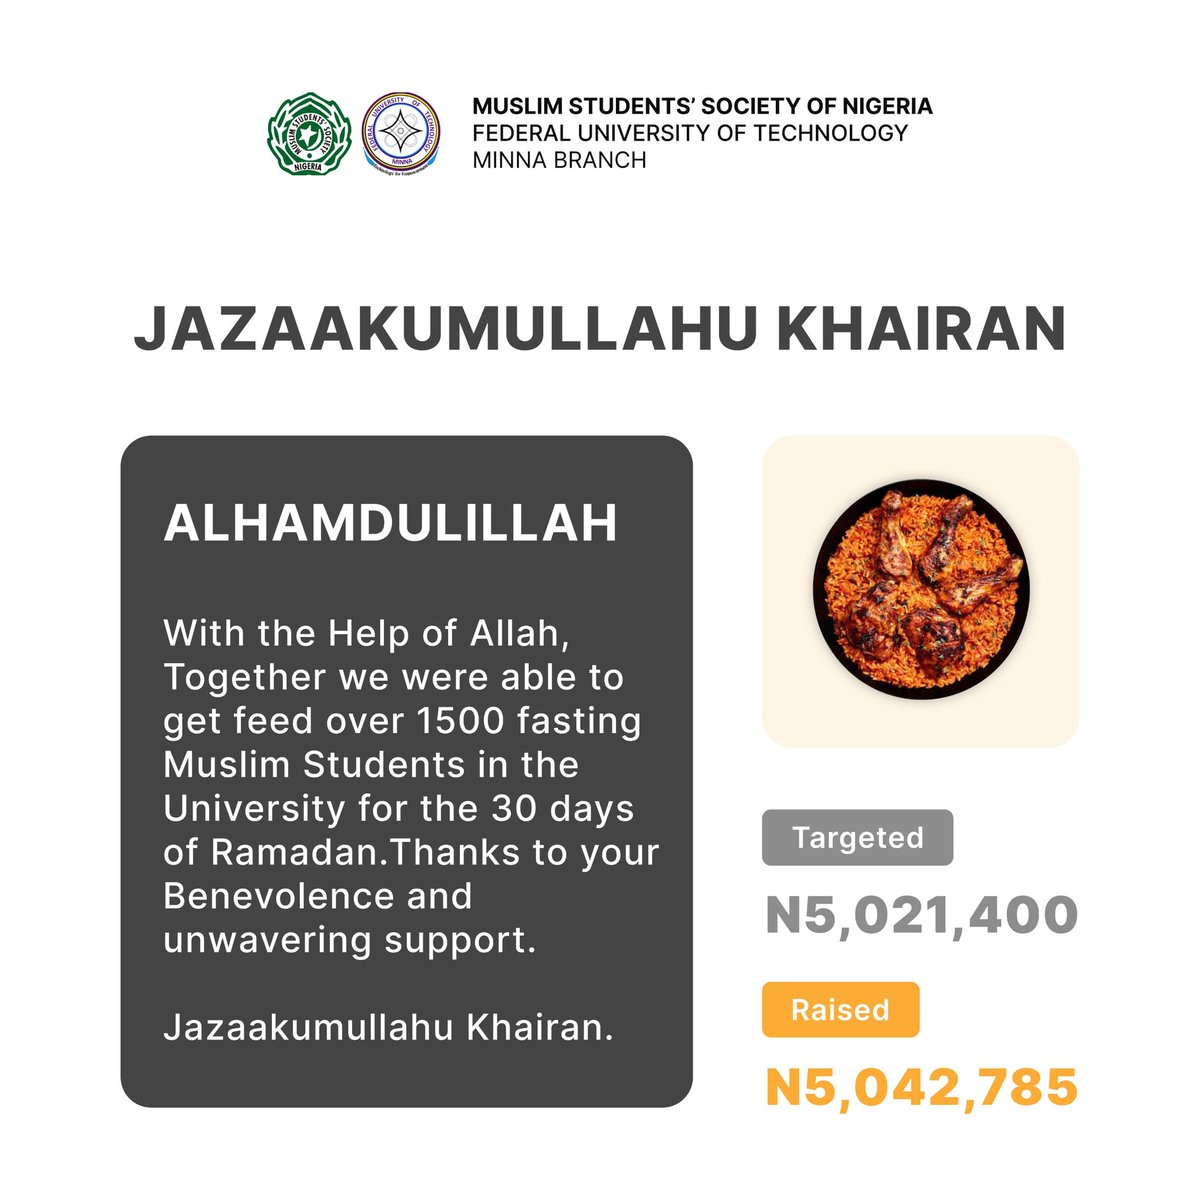 As we wrap up an incredible journey with Our Feed a soul project, we find ourselves reflecting on the immense impact your generosity has had. Jazakum Allahu khayran for your unwavering support. *© MSSN FUTMinna*